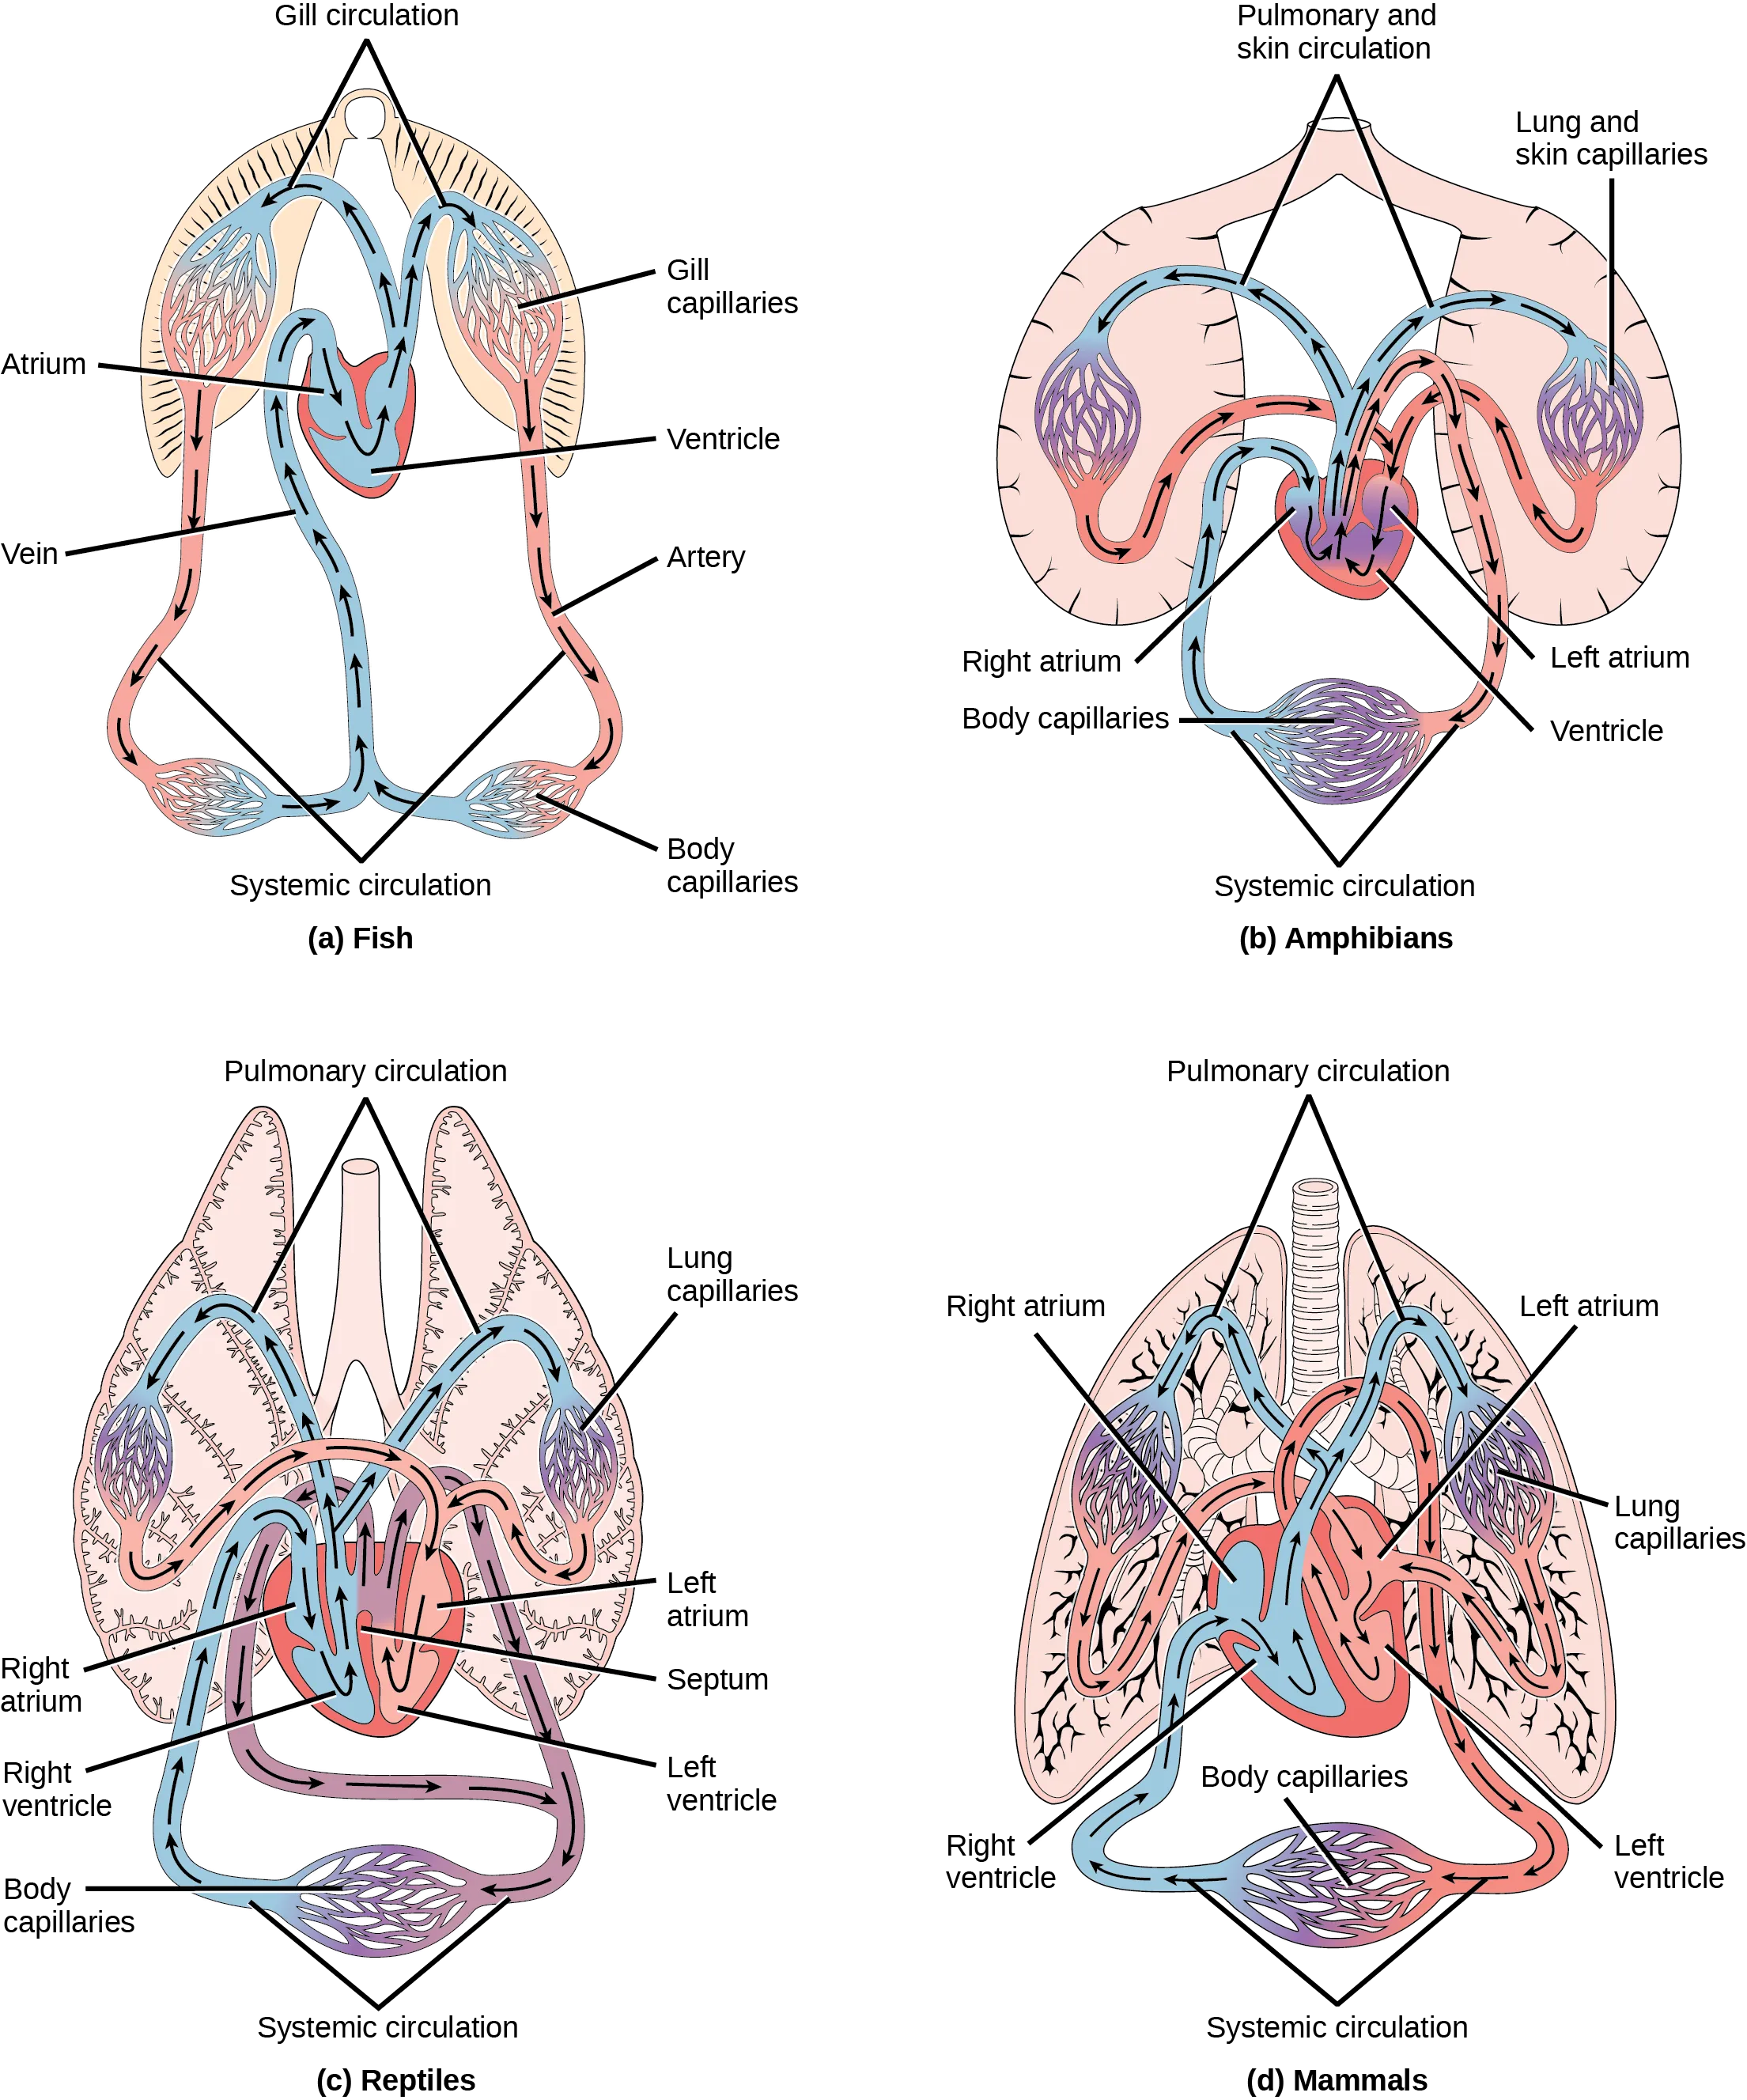 Illustration A shows the circulatory system of fish, which have a two-chambered heart with one atrium and one ventricle. Blood in systemic circulation flows from the body into the atrium, then into the ventricle. Blood exiting the heart enters gill circulation, where gases are exchanged by gill capillaries. From the gills blood re-enters systemic circulation, where gases in the body are exchanged by body capillaries. Illustration B shows the circulatory system of amphibians, which have a three-chambered heart with two atriums and one ventricle. Blood in systemic circulation enters the heart, flows into the right atrium, then into the ventricle. Blood leaving the ventricle enters pulmonary and skin circulation. Capillaries in the lung and skin exchange gases, oxygenating the blood. From the lungs and skin blood re-enters the heart through the left atrium. Blood flows into the ventricle, where it mixes with blood from systemic circulation. Blood leaves the ventricle and enters systemic circulation. Illustration C shows the circulatory system of reptiles, which have a four-chambered heart. The right and left ventricle are separated by a septum, but there is no septum separating the right and left atrium, so there is some mixing of blood between these two chambers. Blood from systemic circulation enters the right atrium, then flows from the right ventricle and enters pulmonary circulation, where blood is oxygenated in the lungs. From the lungs blood travels back into the heart through the left atrium. Because the left and right atrium are not separated, some mixing of oxygenated and deoxygenated blood occurs. Blood is pumped into the left ventricle, then into the body. Illustration D shows the circulatory system of mammals, which have a four-chambered heart. Circulation is similar to that of reptiles, but the four chambers are completely separate from one another, which improves efficiency.